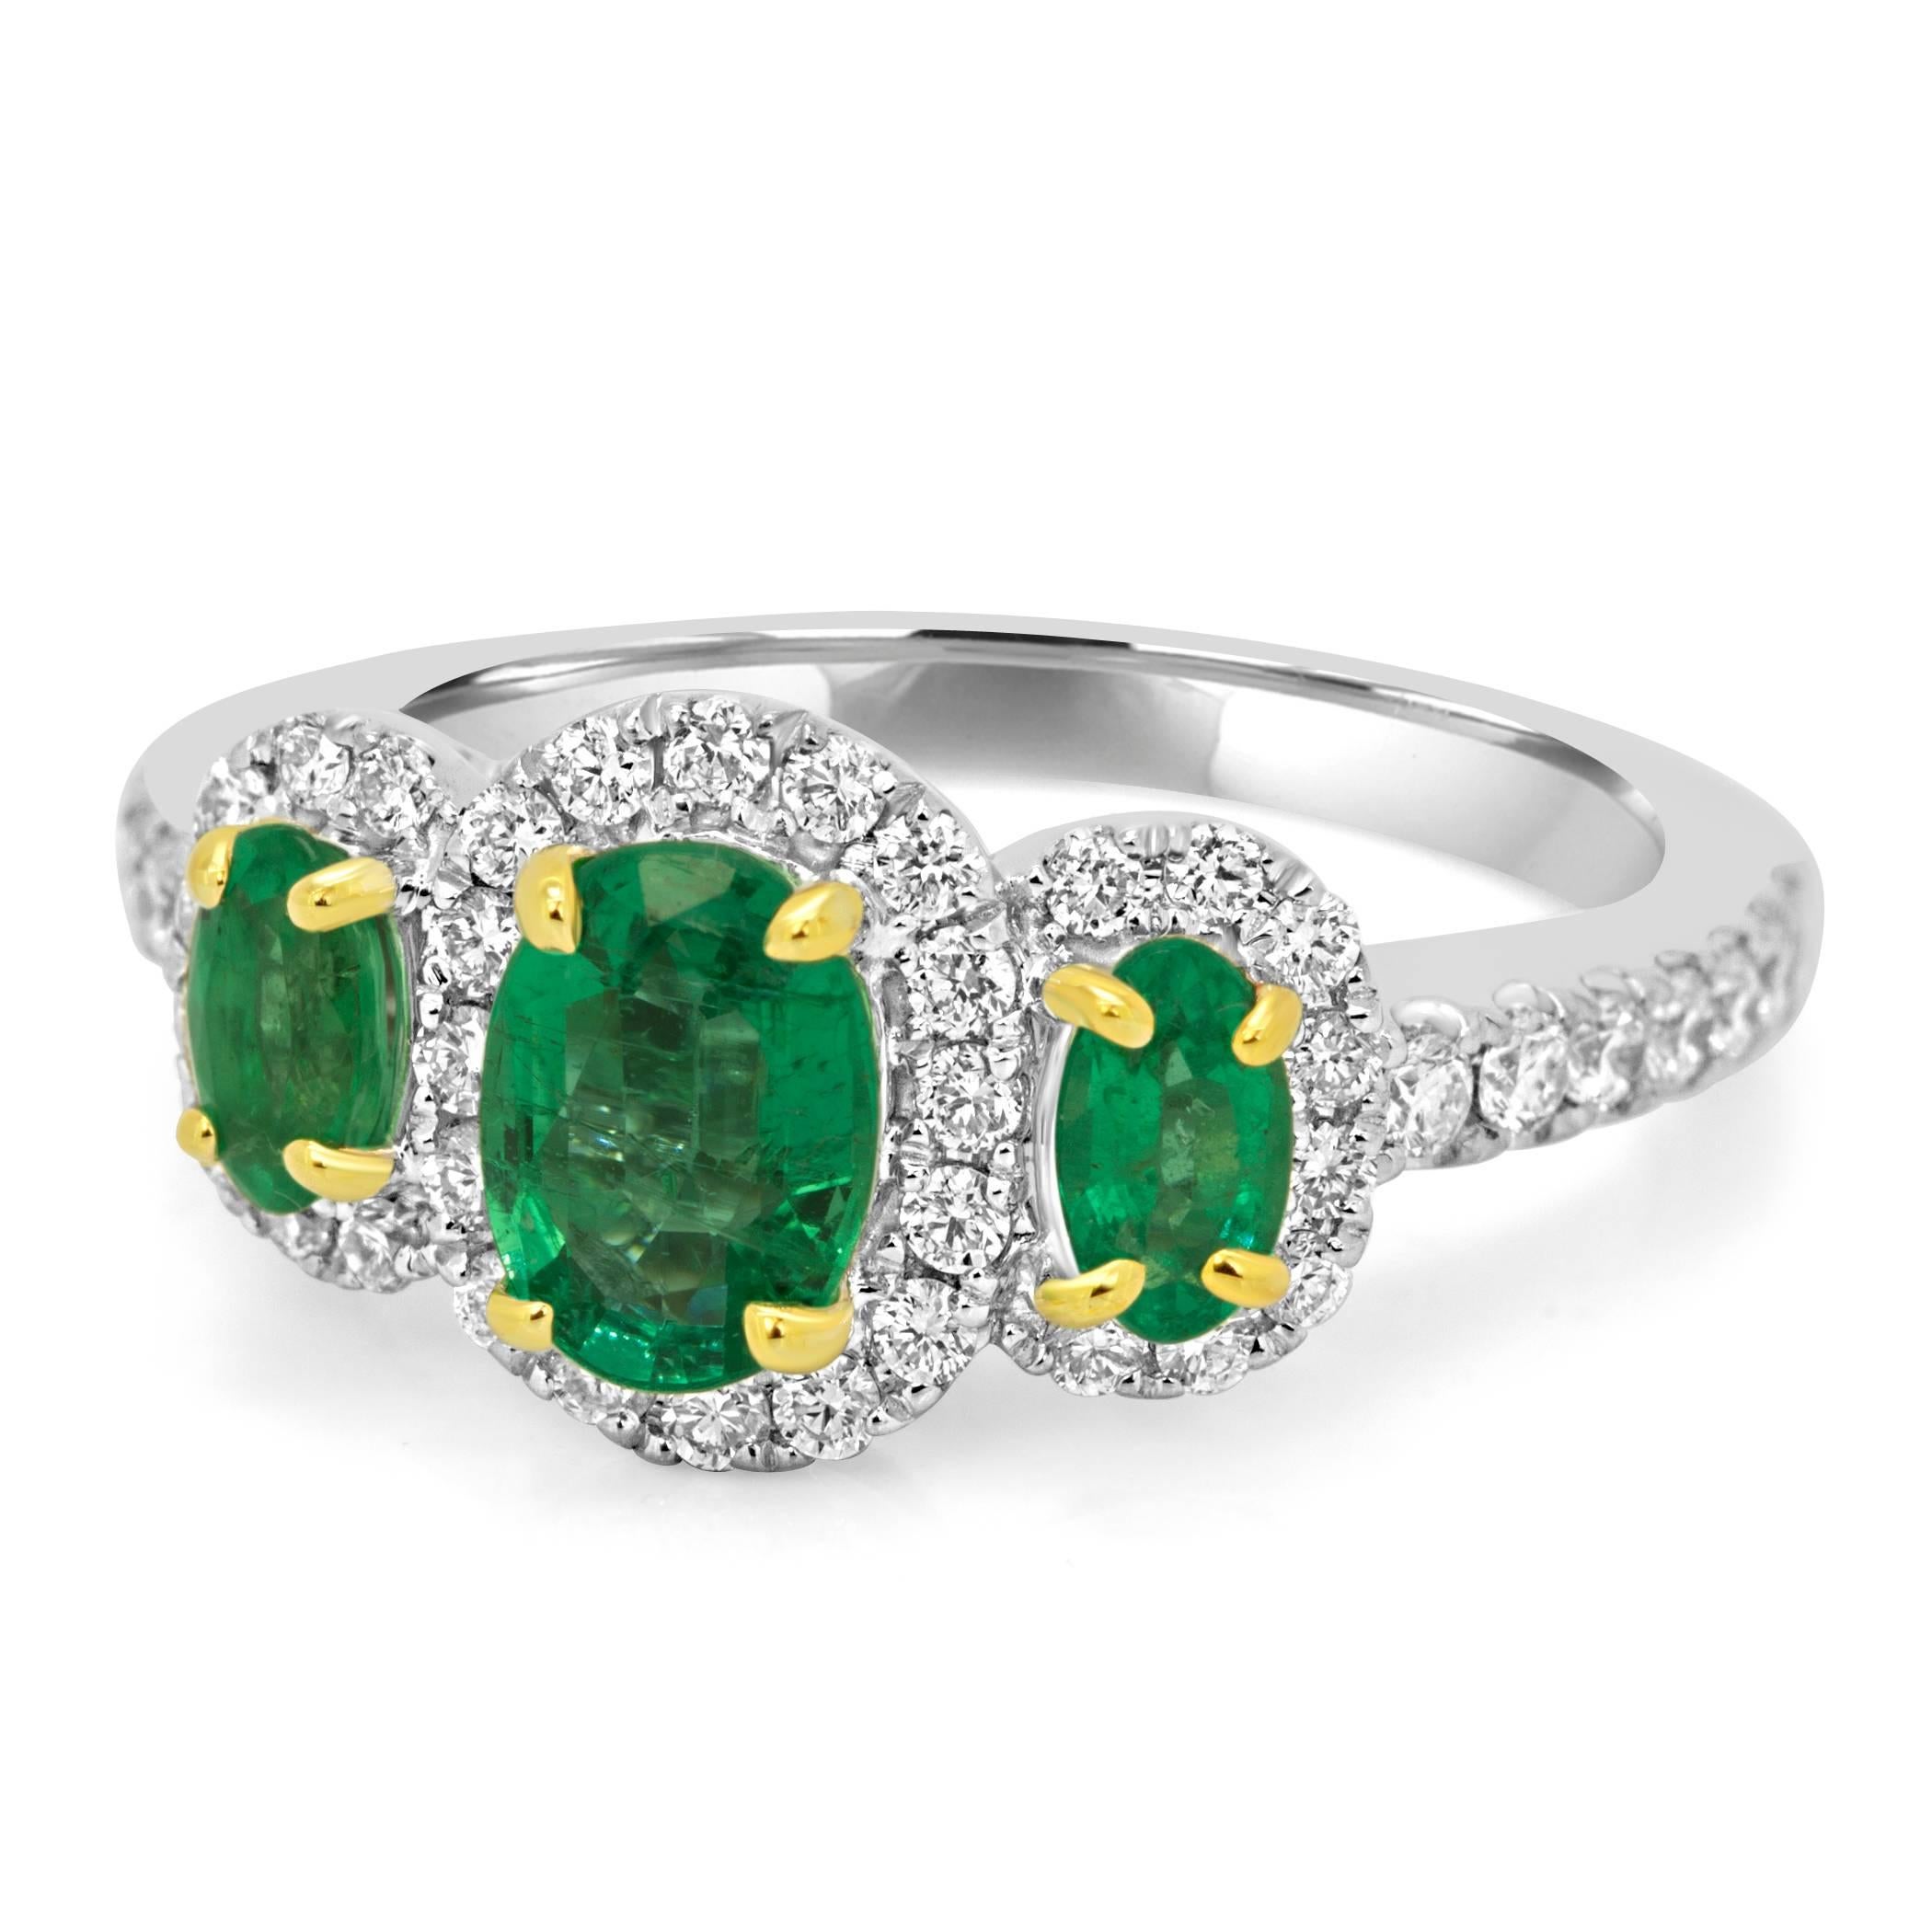 Stunning Three Stone Emerald Ring 1 Emerald Oval 0.90 Carat flanked with 2 Emerald Oval 0.45 Carat in a single Halo of White Round Diamonds 0.56 Carat in 14K White and Yellow Gold Fashion Cocktail Ring.

Style available in different price ranges.